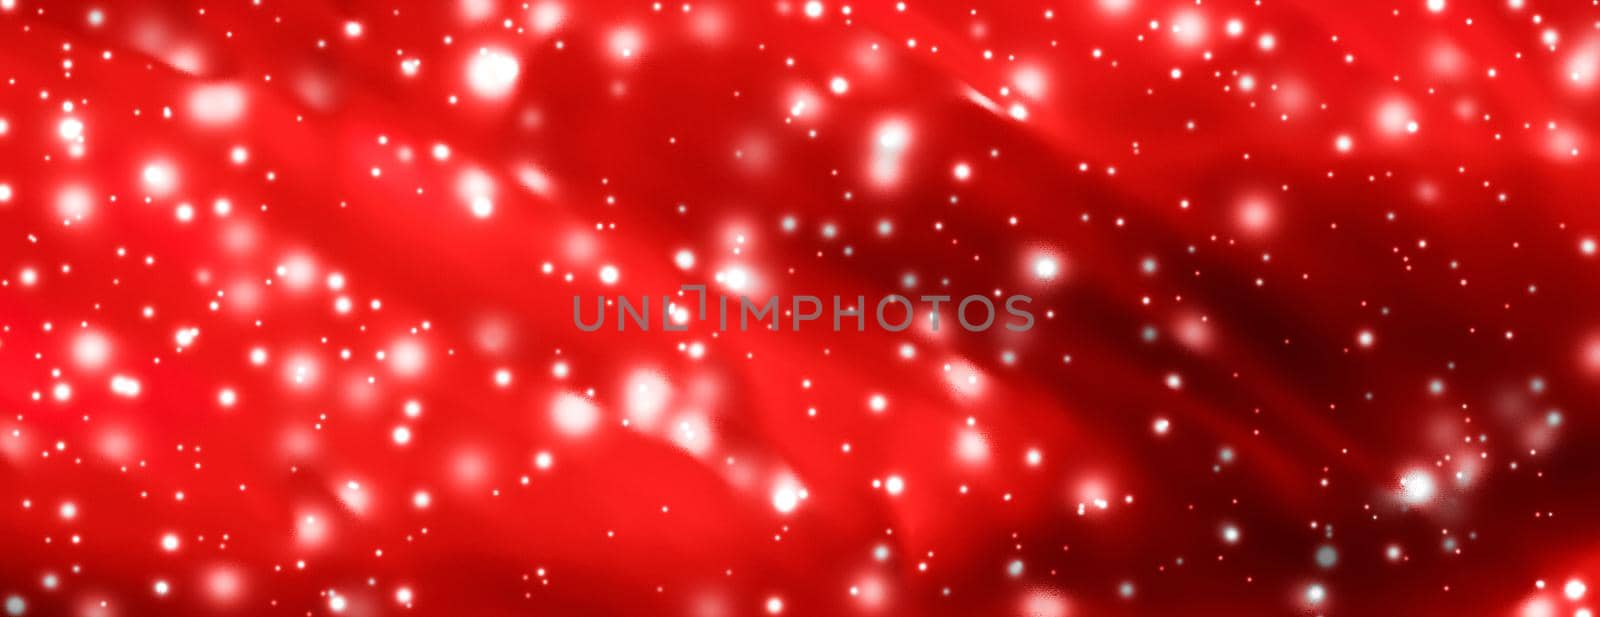 Christmas, New Years and Valentines Day red abstract background, holidays card design, shiny snow glitter as winter season sale backdrop for luxury beauty brand by Anneleven